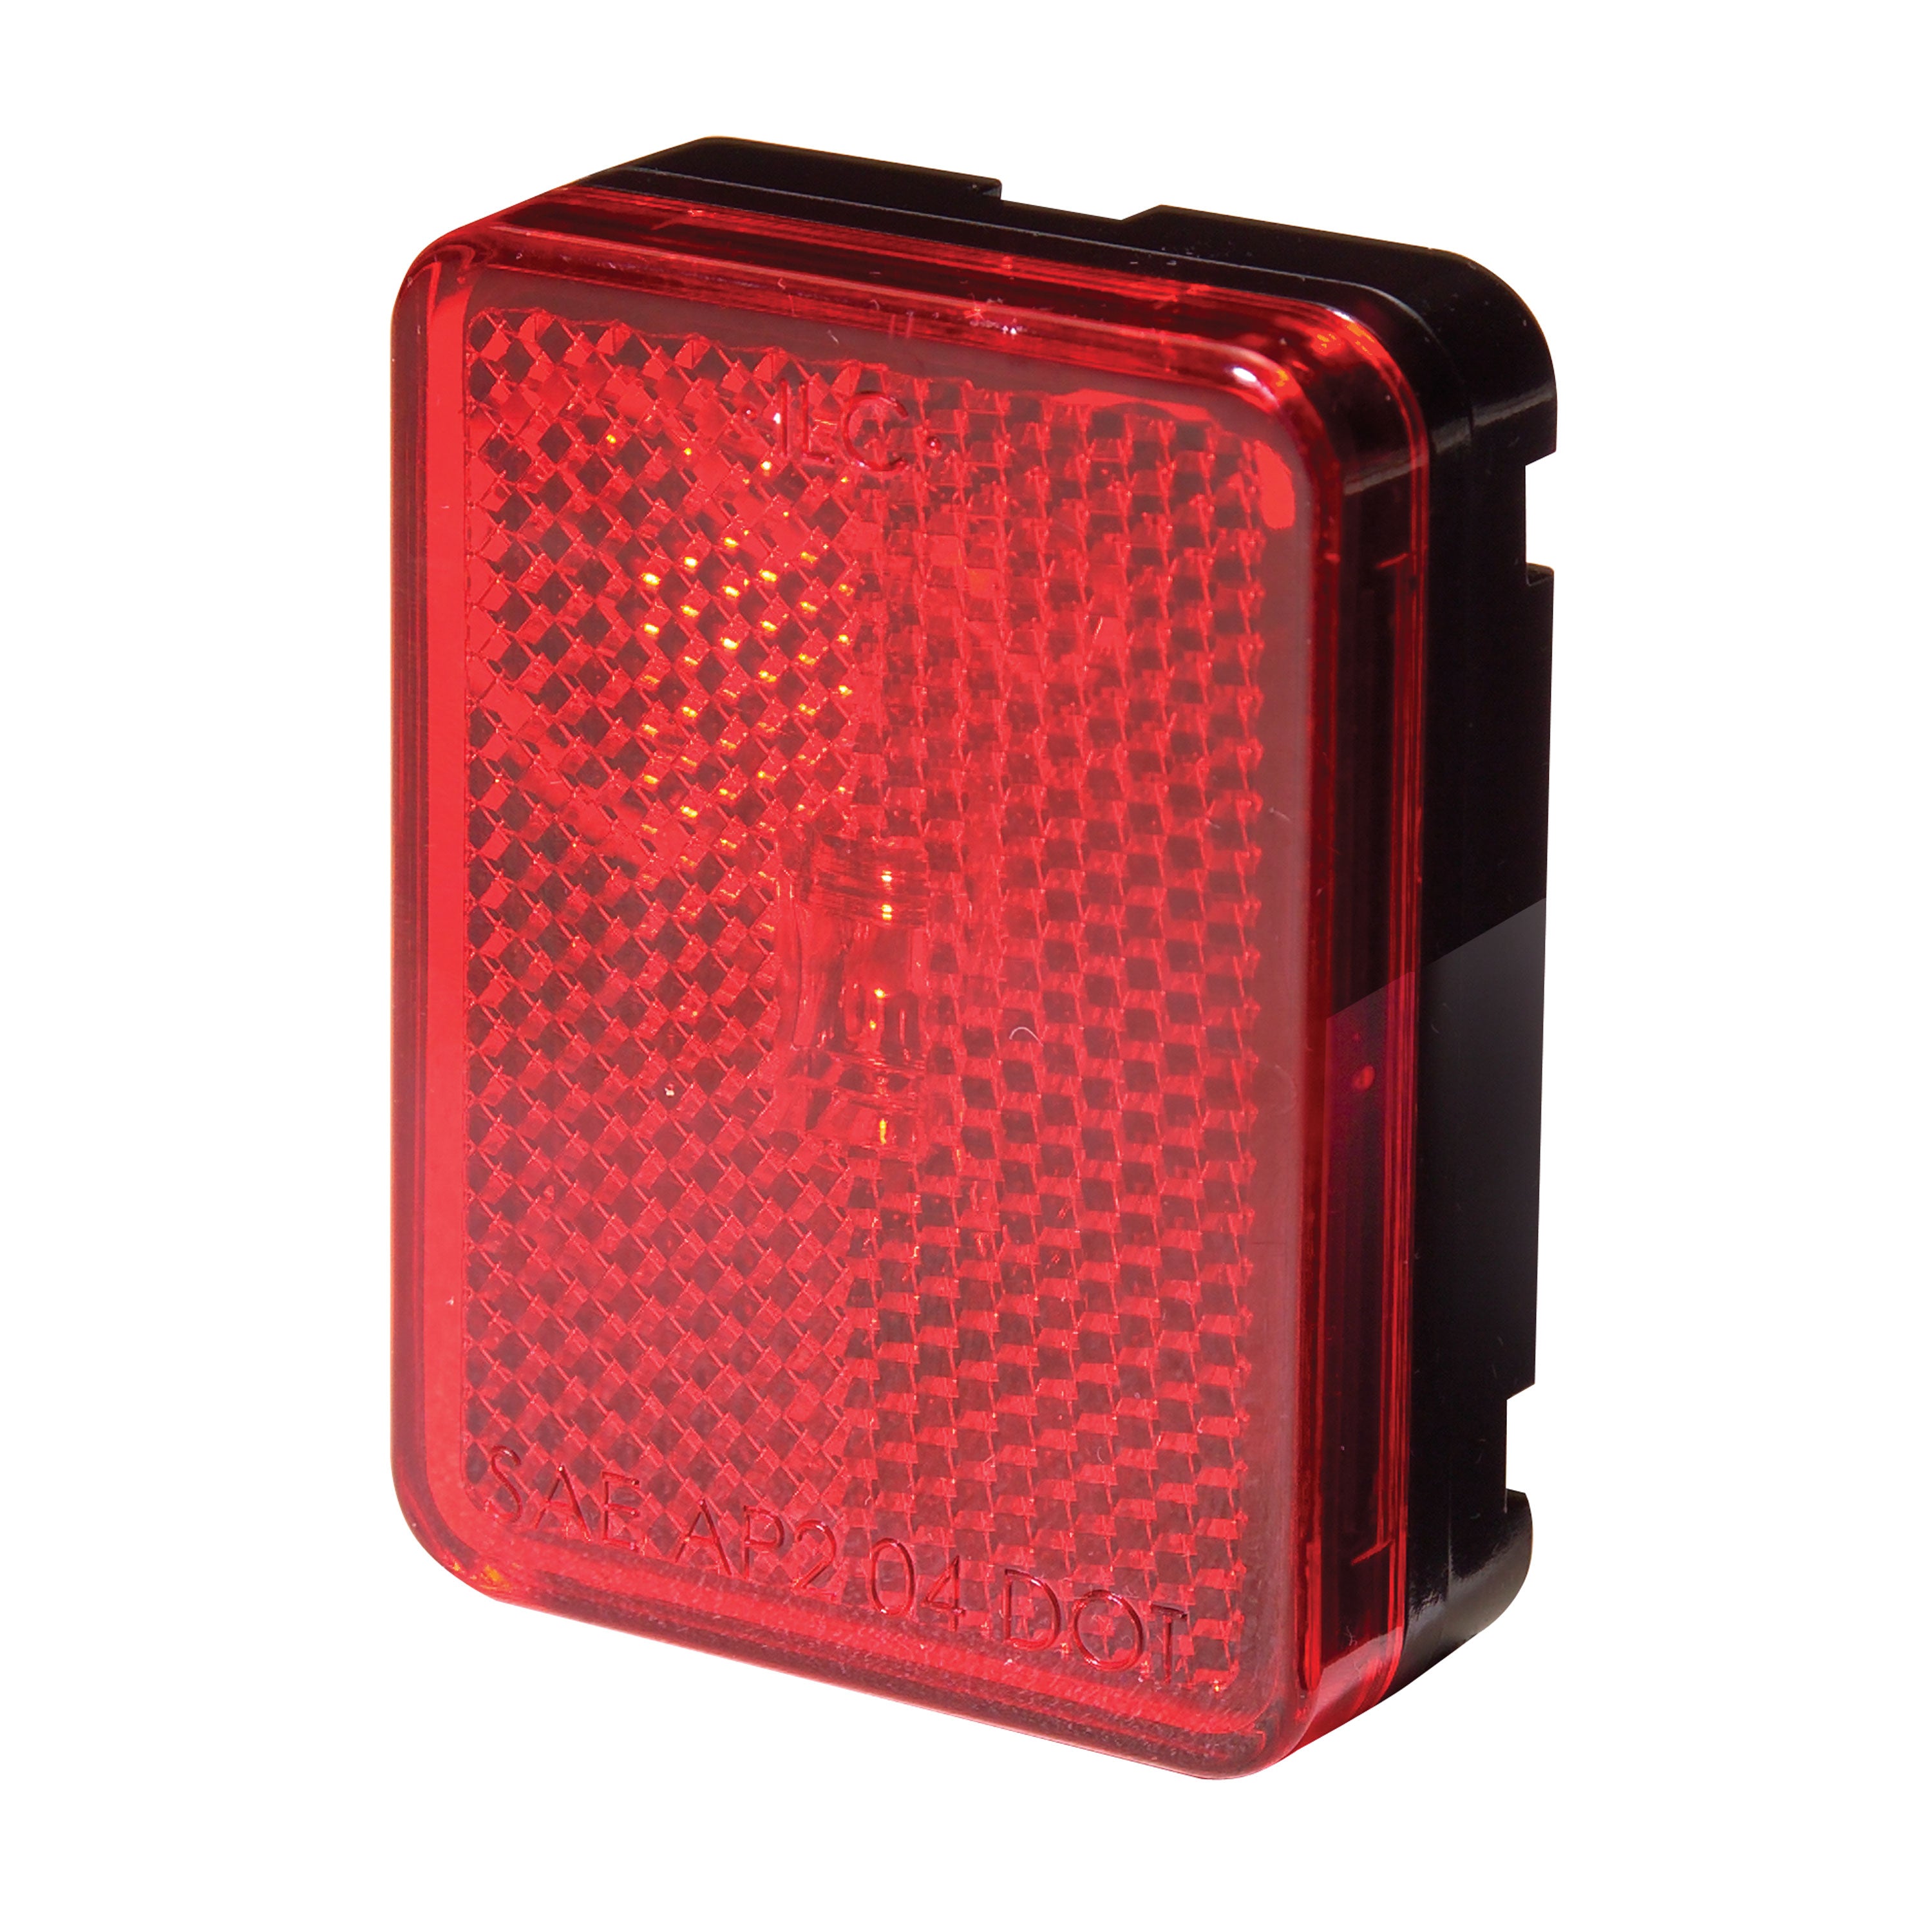 Innovative Lighting 202-4400-7 LED Sidemarker/Clearance Light With Reflectivity - Red